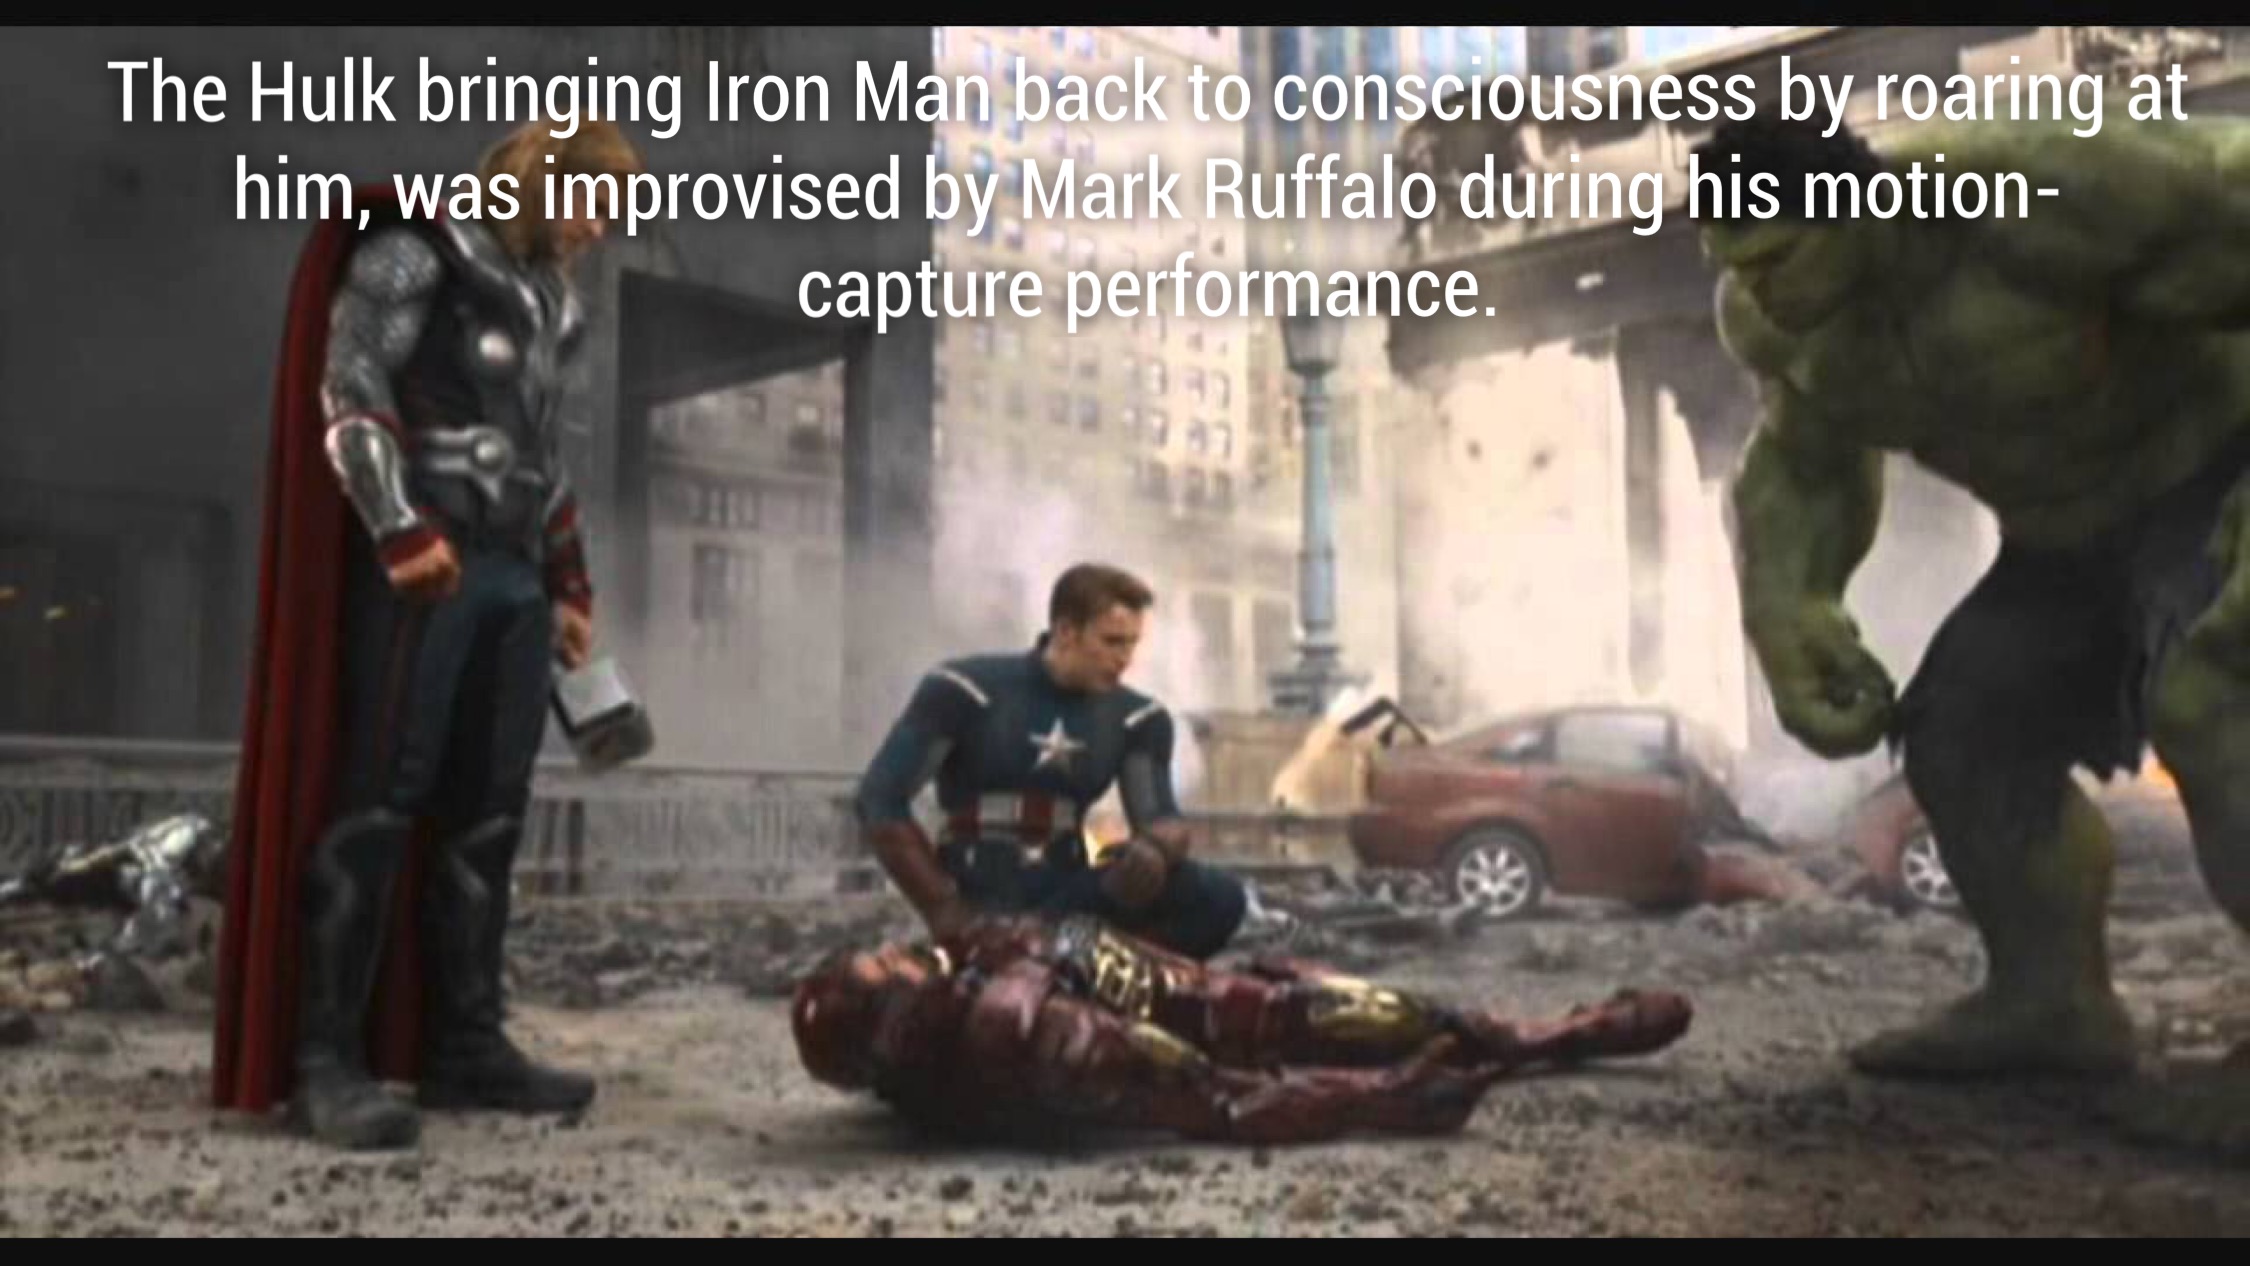 green screens that expose hollywood - The Hulk bringing Iron Man back to consciousness by roaring at him, was improvised by Mark Ruffalo during his motion capture performance.